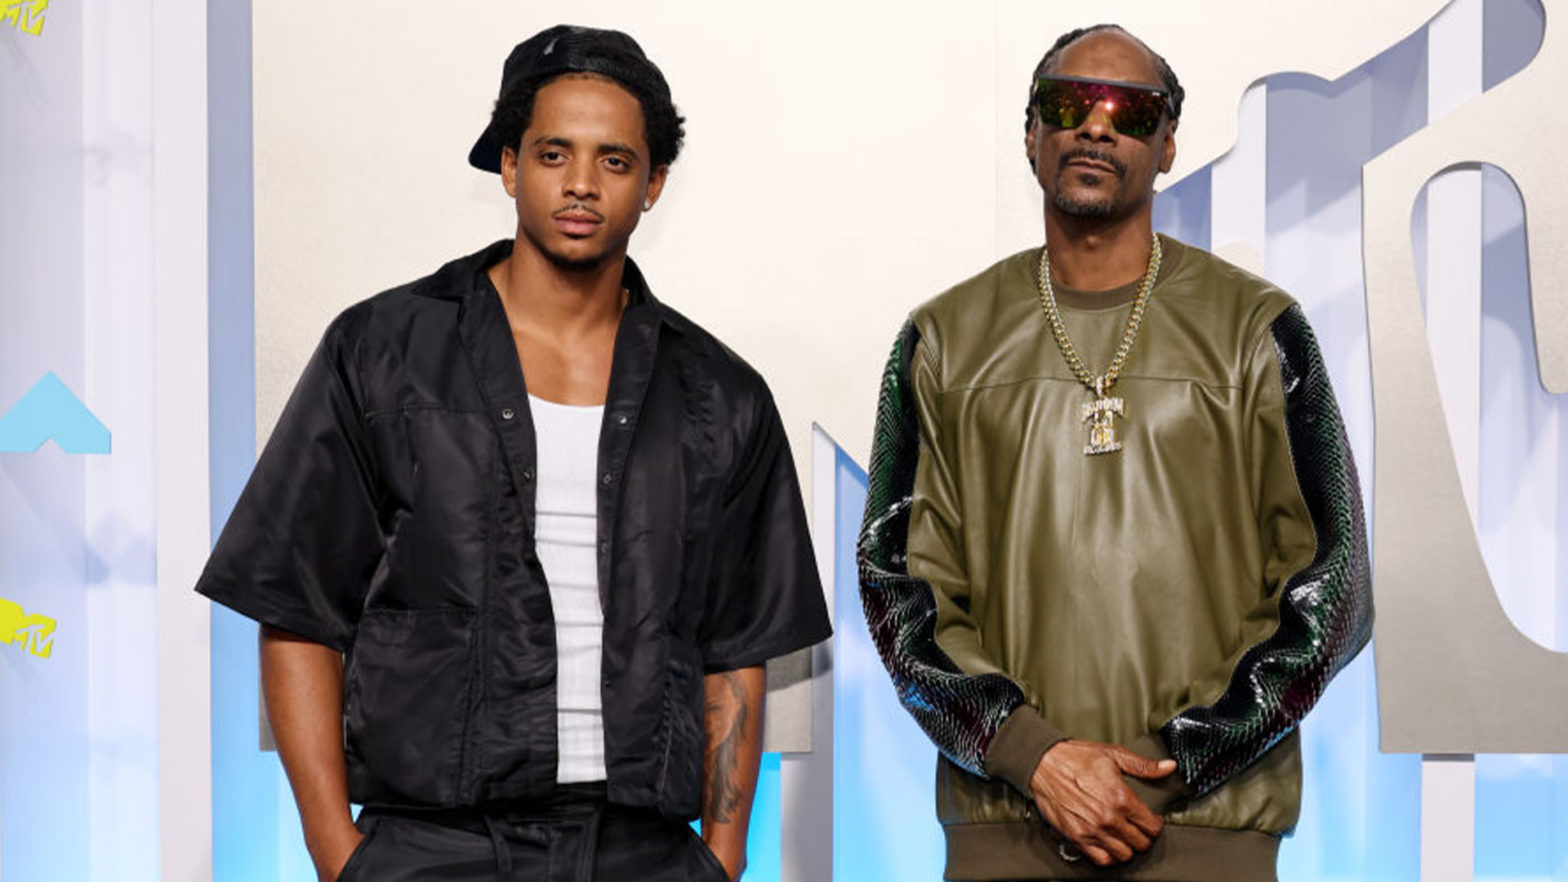 Snoop Dogg's Son Cordell Broadus, A Web3 And Crypto Entrepreneur, Launches A $1M Fund For Artists